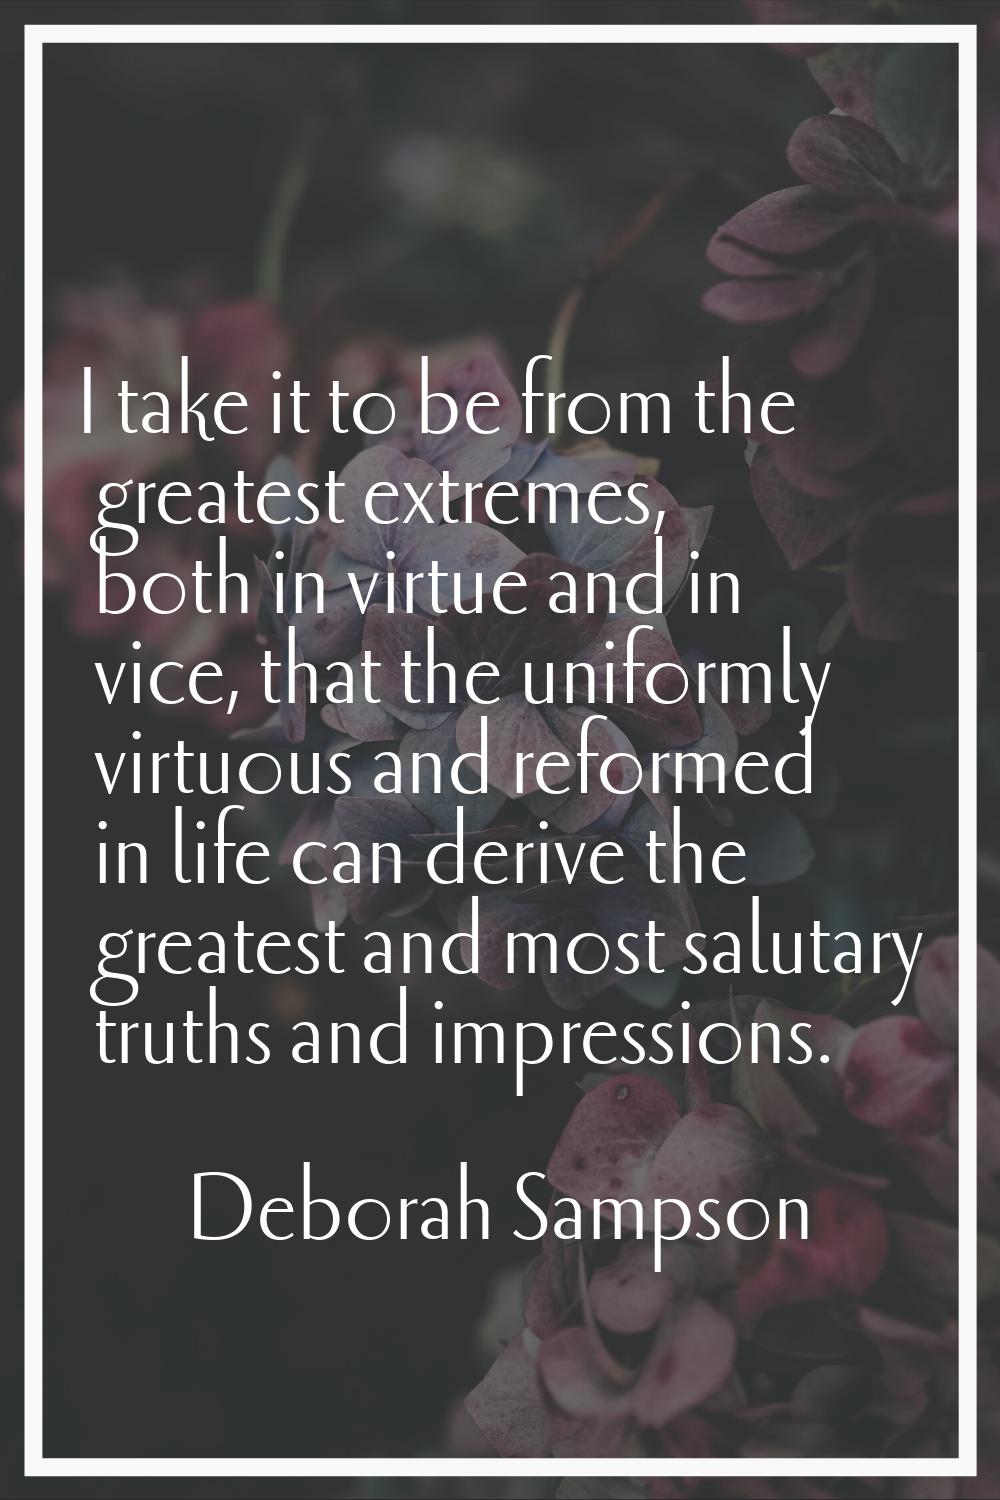 I take it to be from the greatest extremes, both in virtue and in vice, that the uniformly virtuous